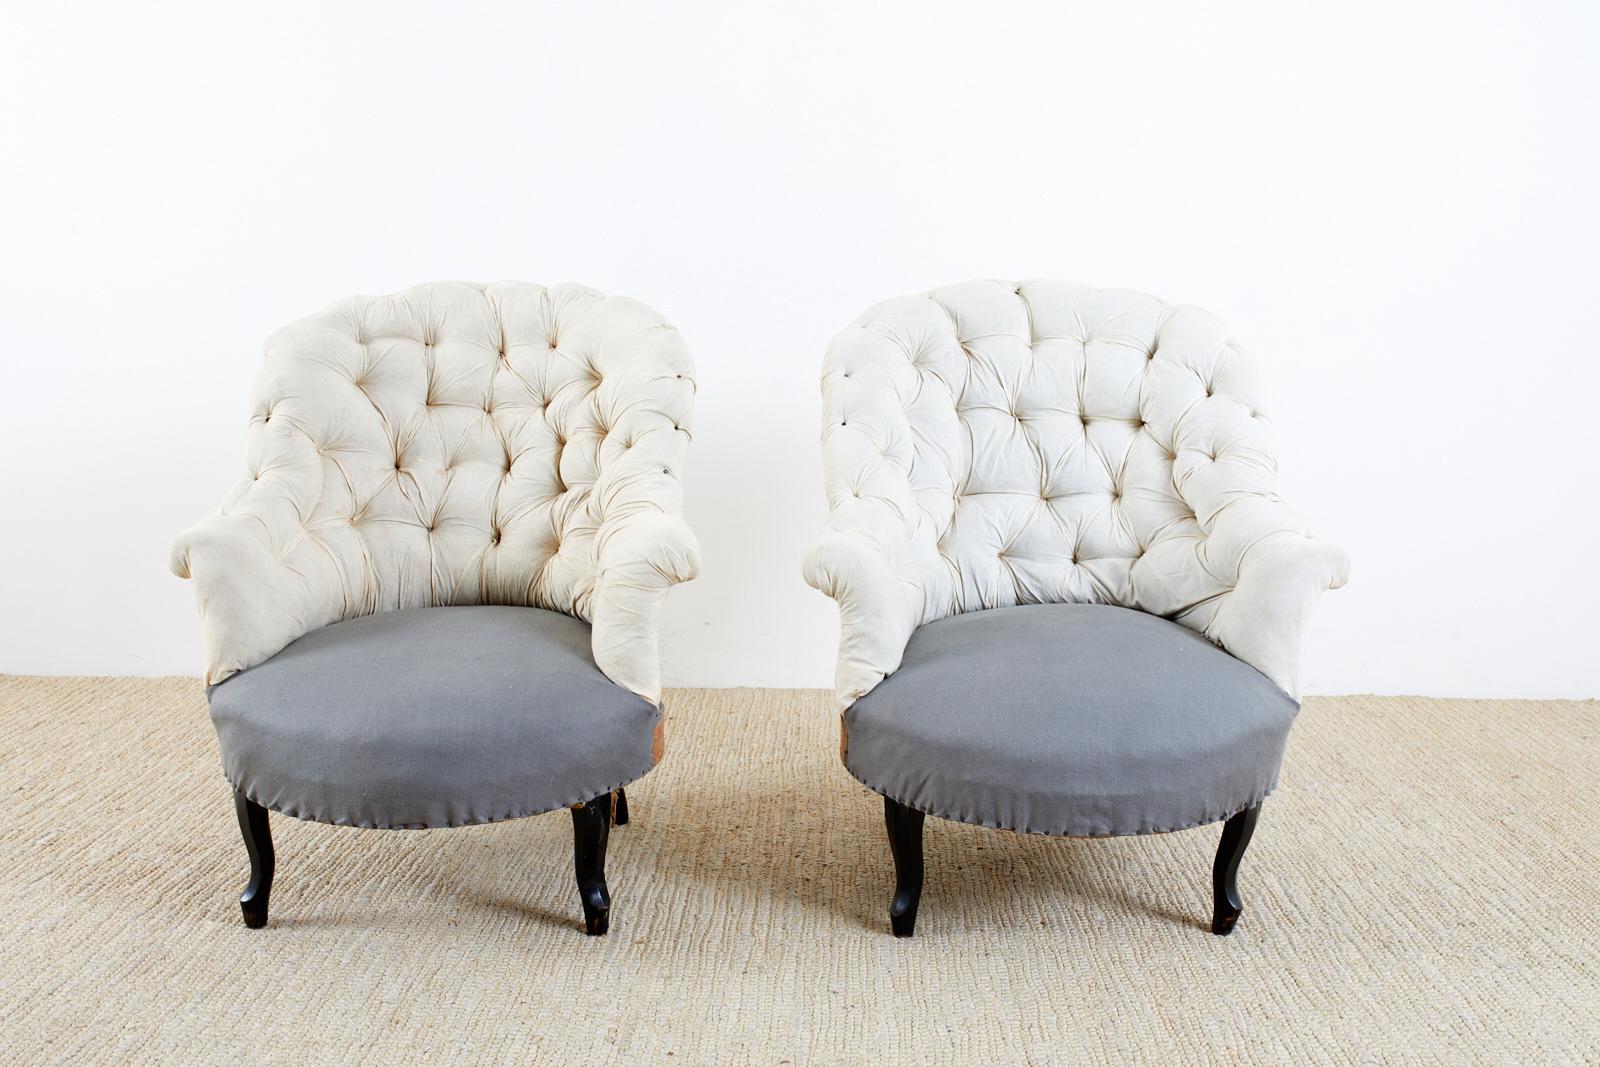 Charming pair of 19th century French Napoleon III period slipper chairs having a deconstructed style. The chairs feature a curved back with a tufted padding of muslin and an exposed back side of hand tied burlap. The round seat is upholstered with